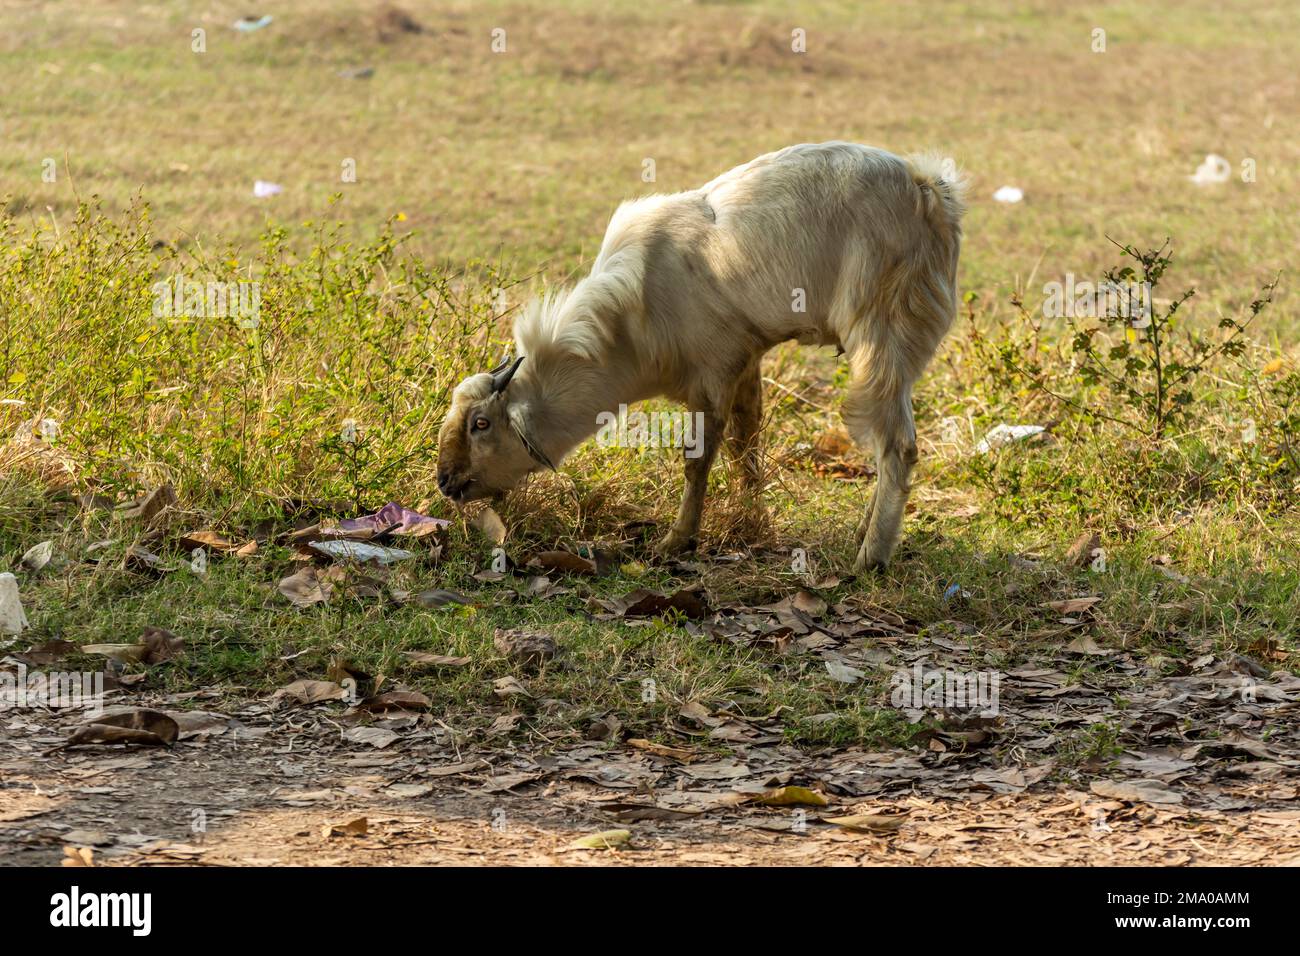 Goat is eating and grazing grass. Stock Photo